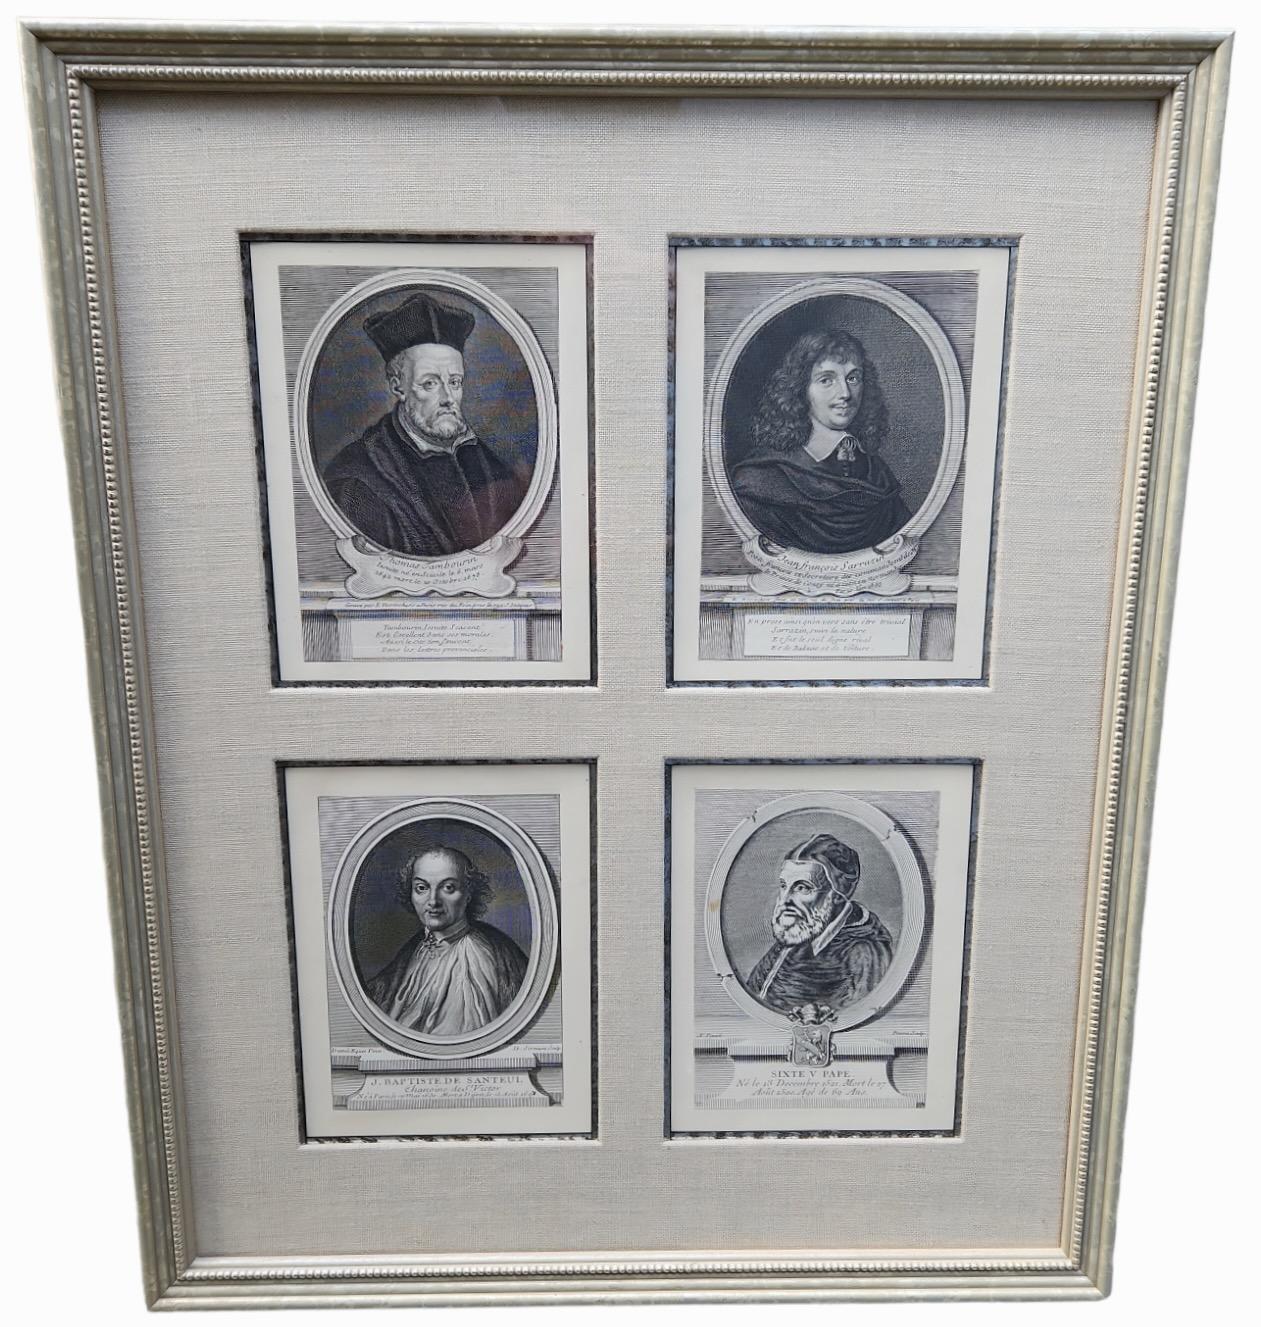 Group of 4 (individual) lithographs of important men of their day. Finely detailed. Framed and matted with bone linen matte. Silver-leafed frames. 21 available.